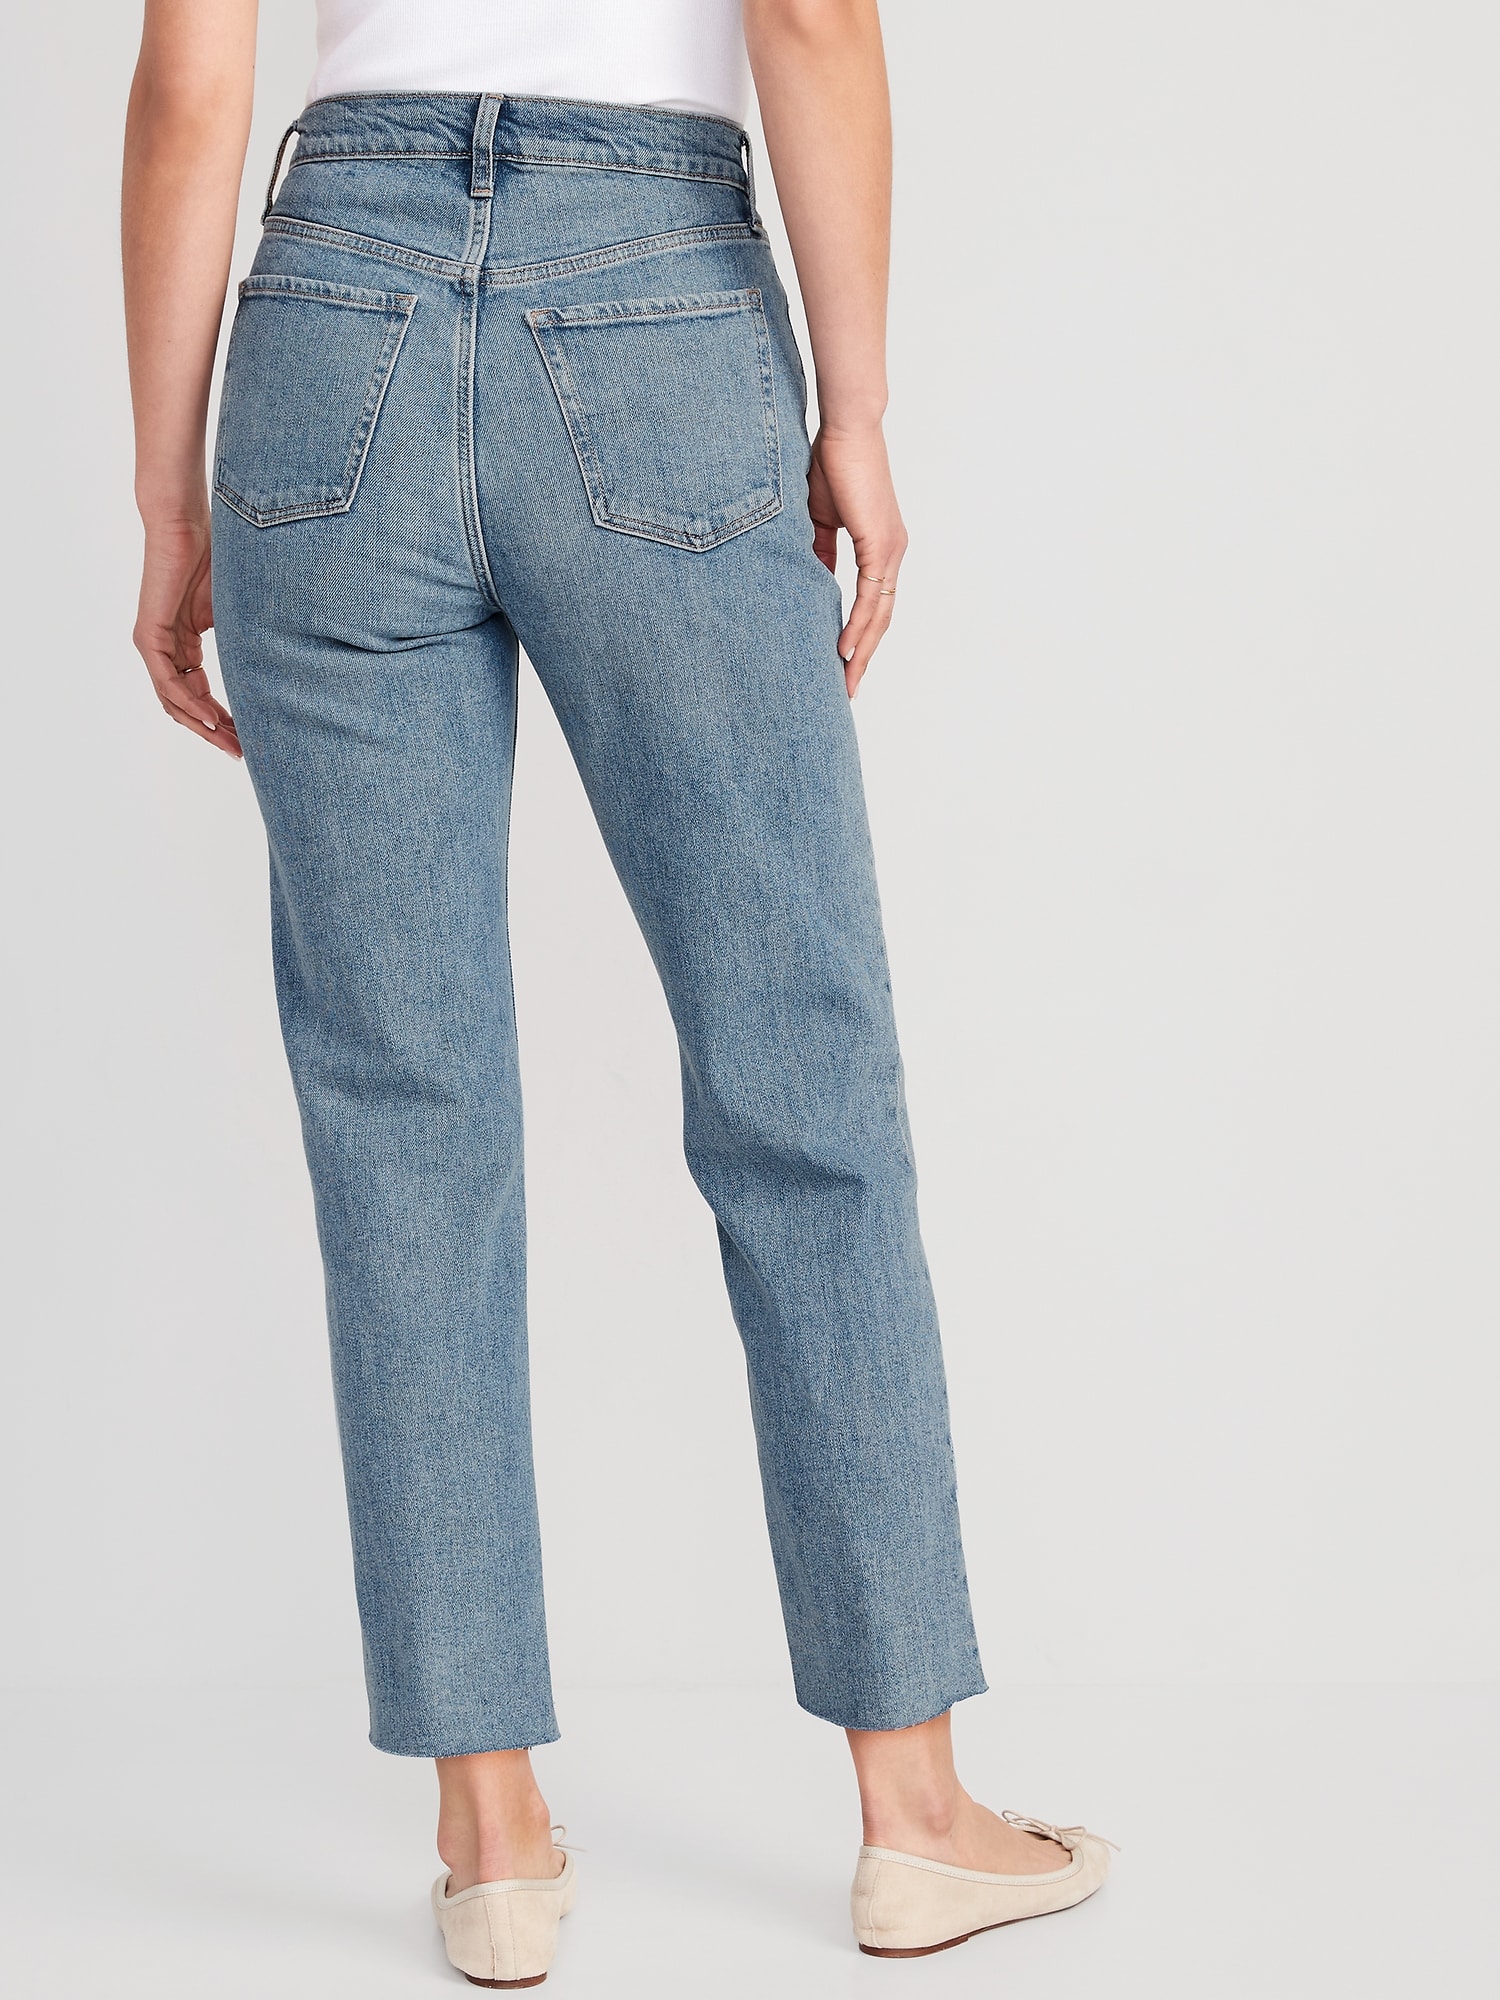 Extra High-Waisted Button-Fly Cut-Off Straight Jeans for Women | Old Navy